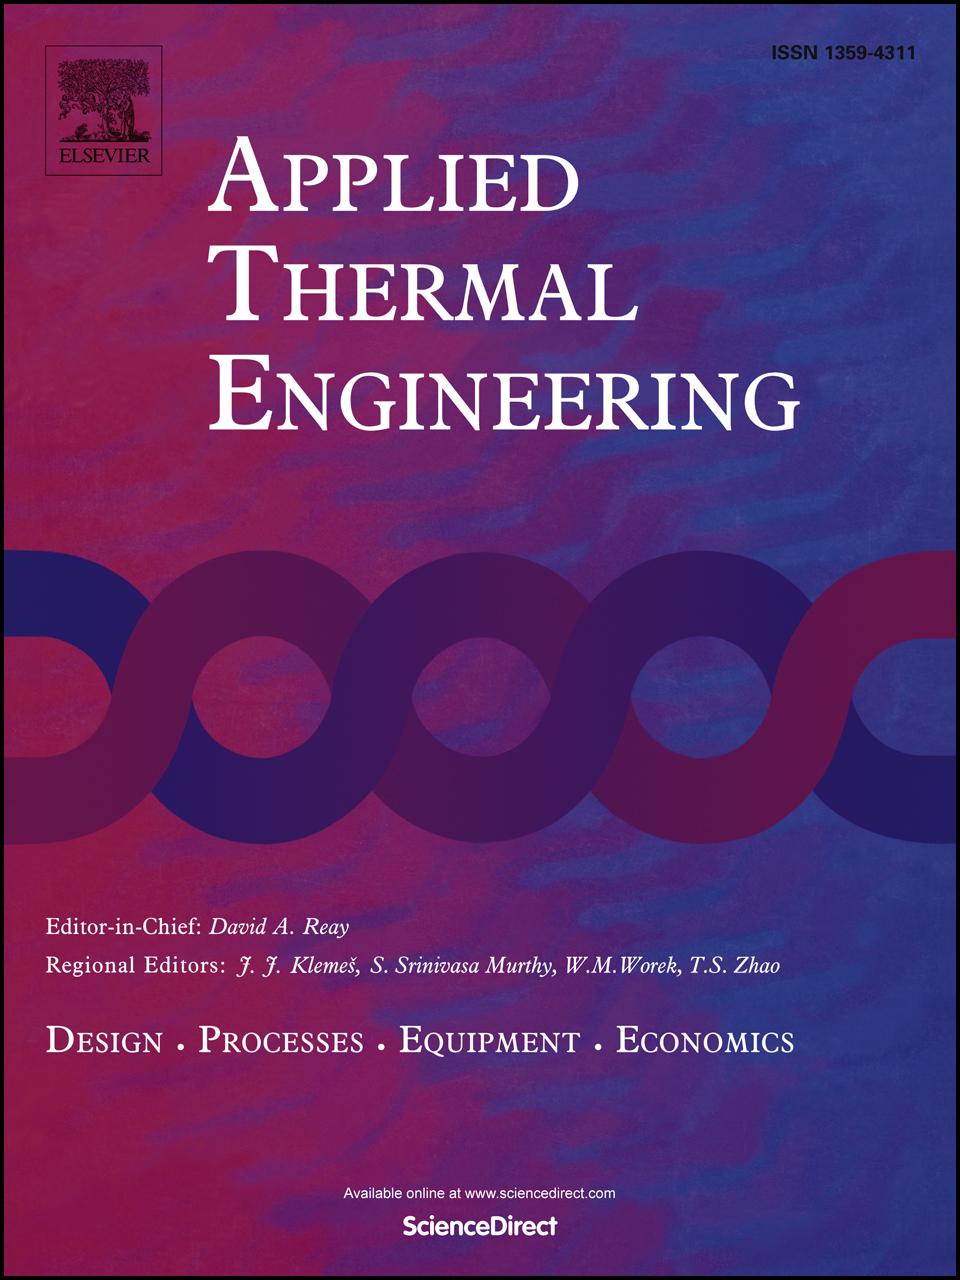 Accepted Manscript Thermal Performance of Hydronic Radiator with Flow Plsation Nmerical Investigation M. Embaye, R.K. AL Dadah, S. Mahmod PII: S1359-4311(1401185-5 DOI: 10.1016/j.applthermaleng.2014.